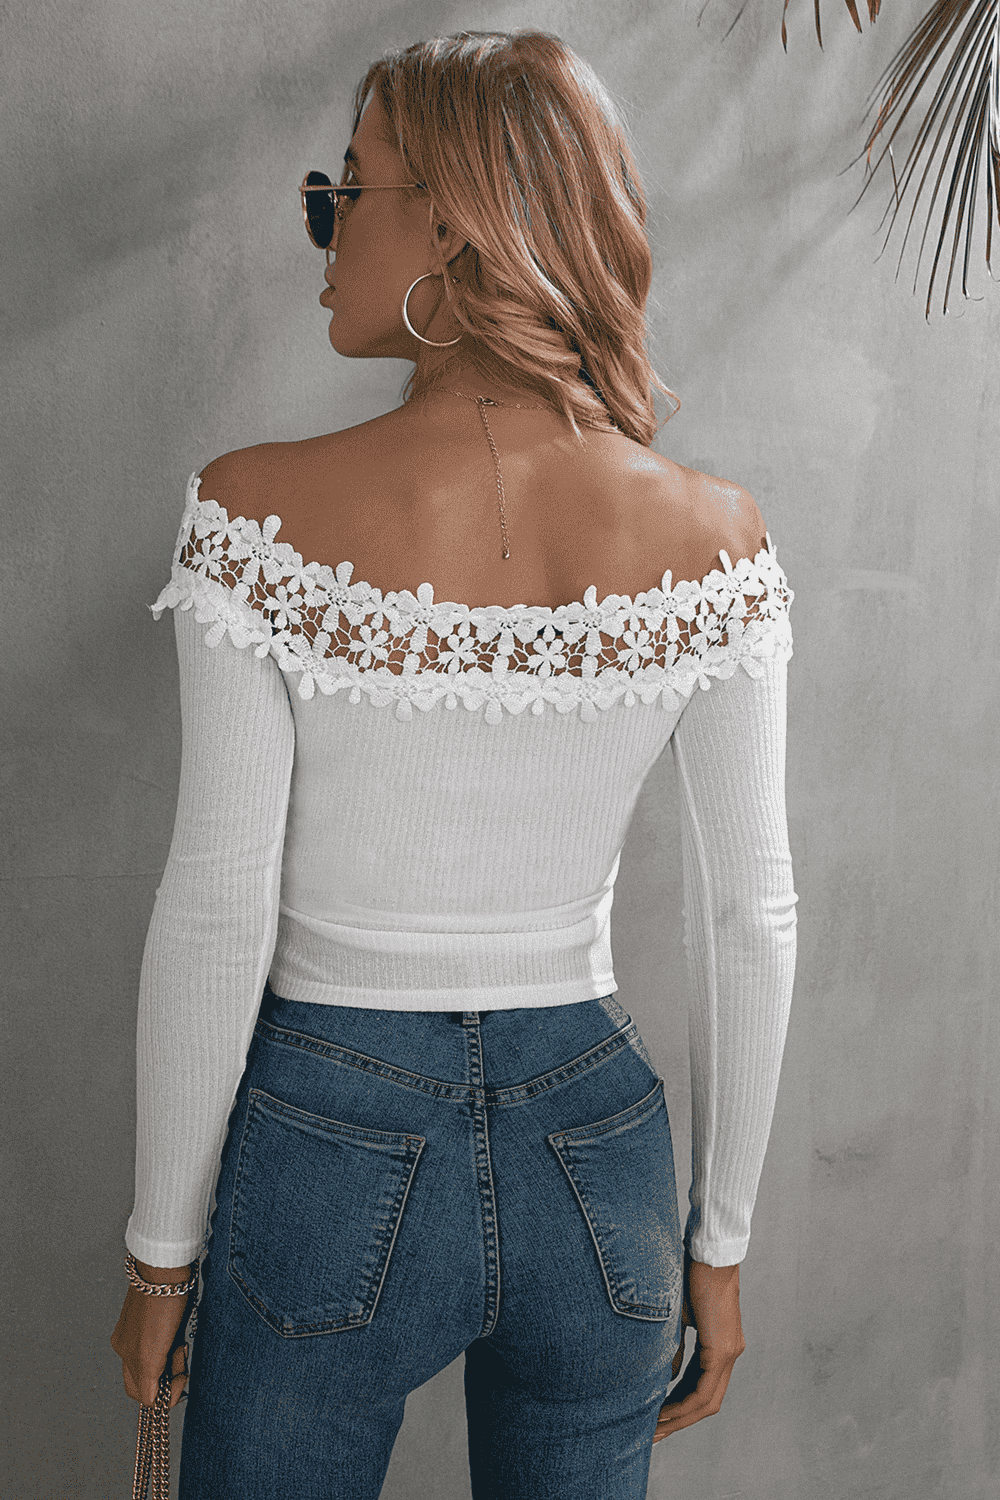 Off-Shoulder Lace Trim Ribbed Tee - T-Shirts - Shirts & Tops - 11 - 2024